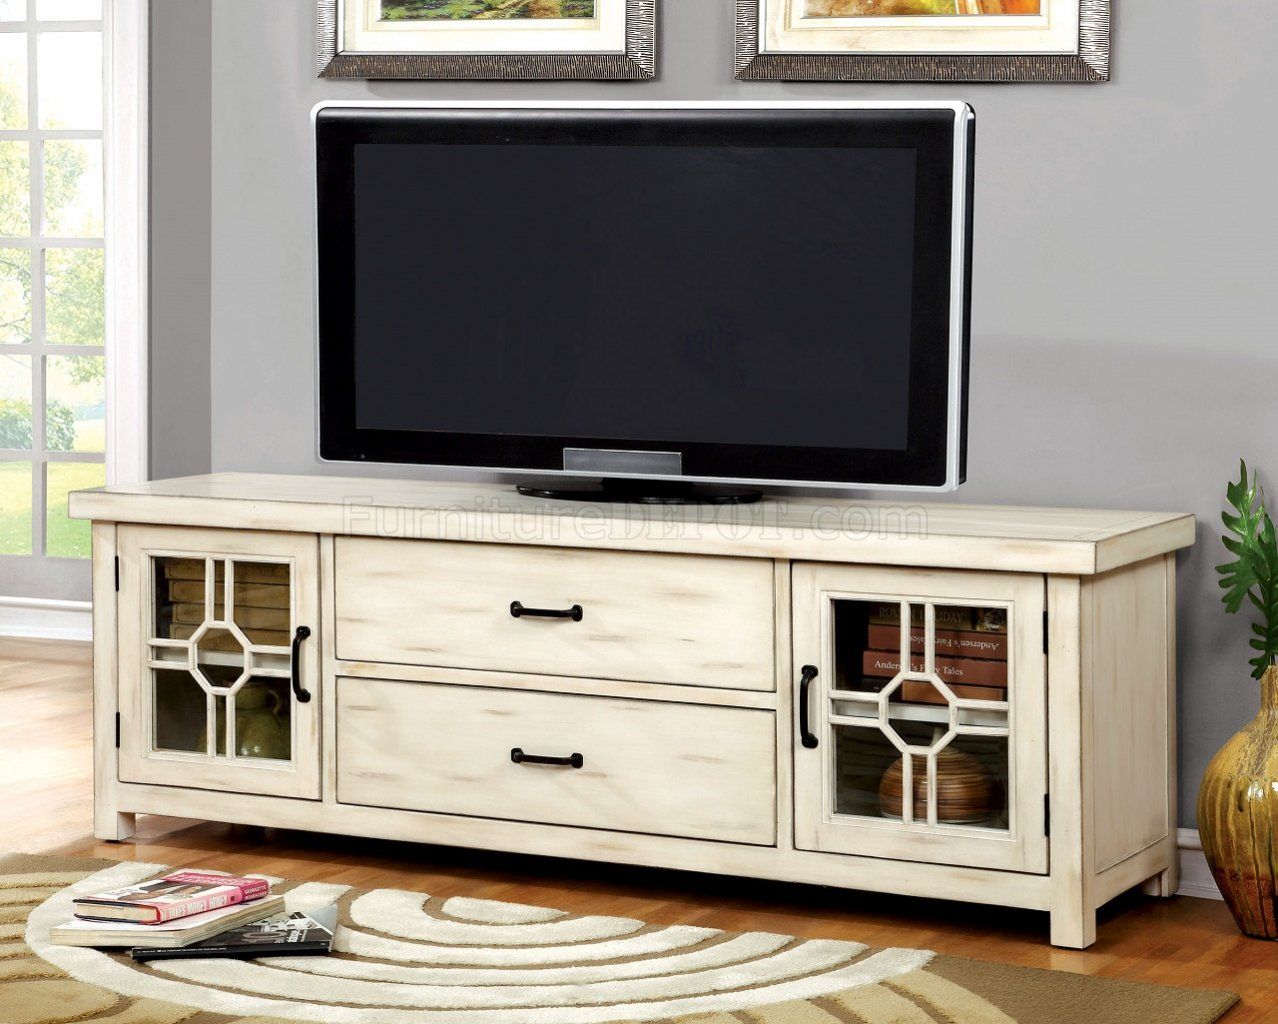 Ridley Cm5230 Tv Console In Antique Style White W/optional Throughout Alden Design Wooden Tv Stands With Storage Cabinet Espresso (View 4 of 15)